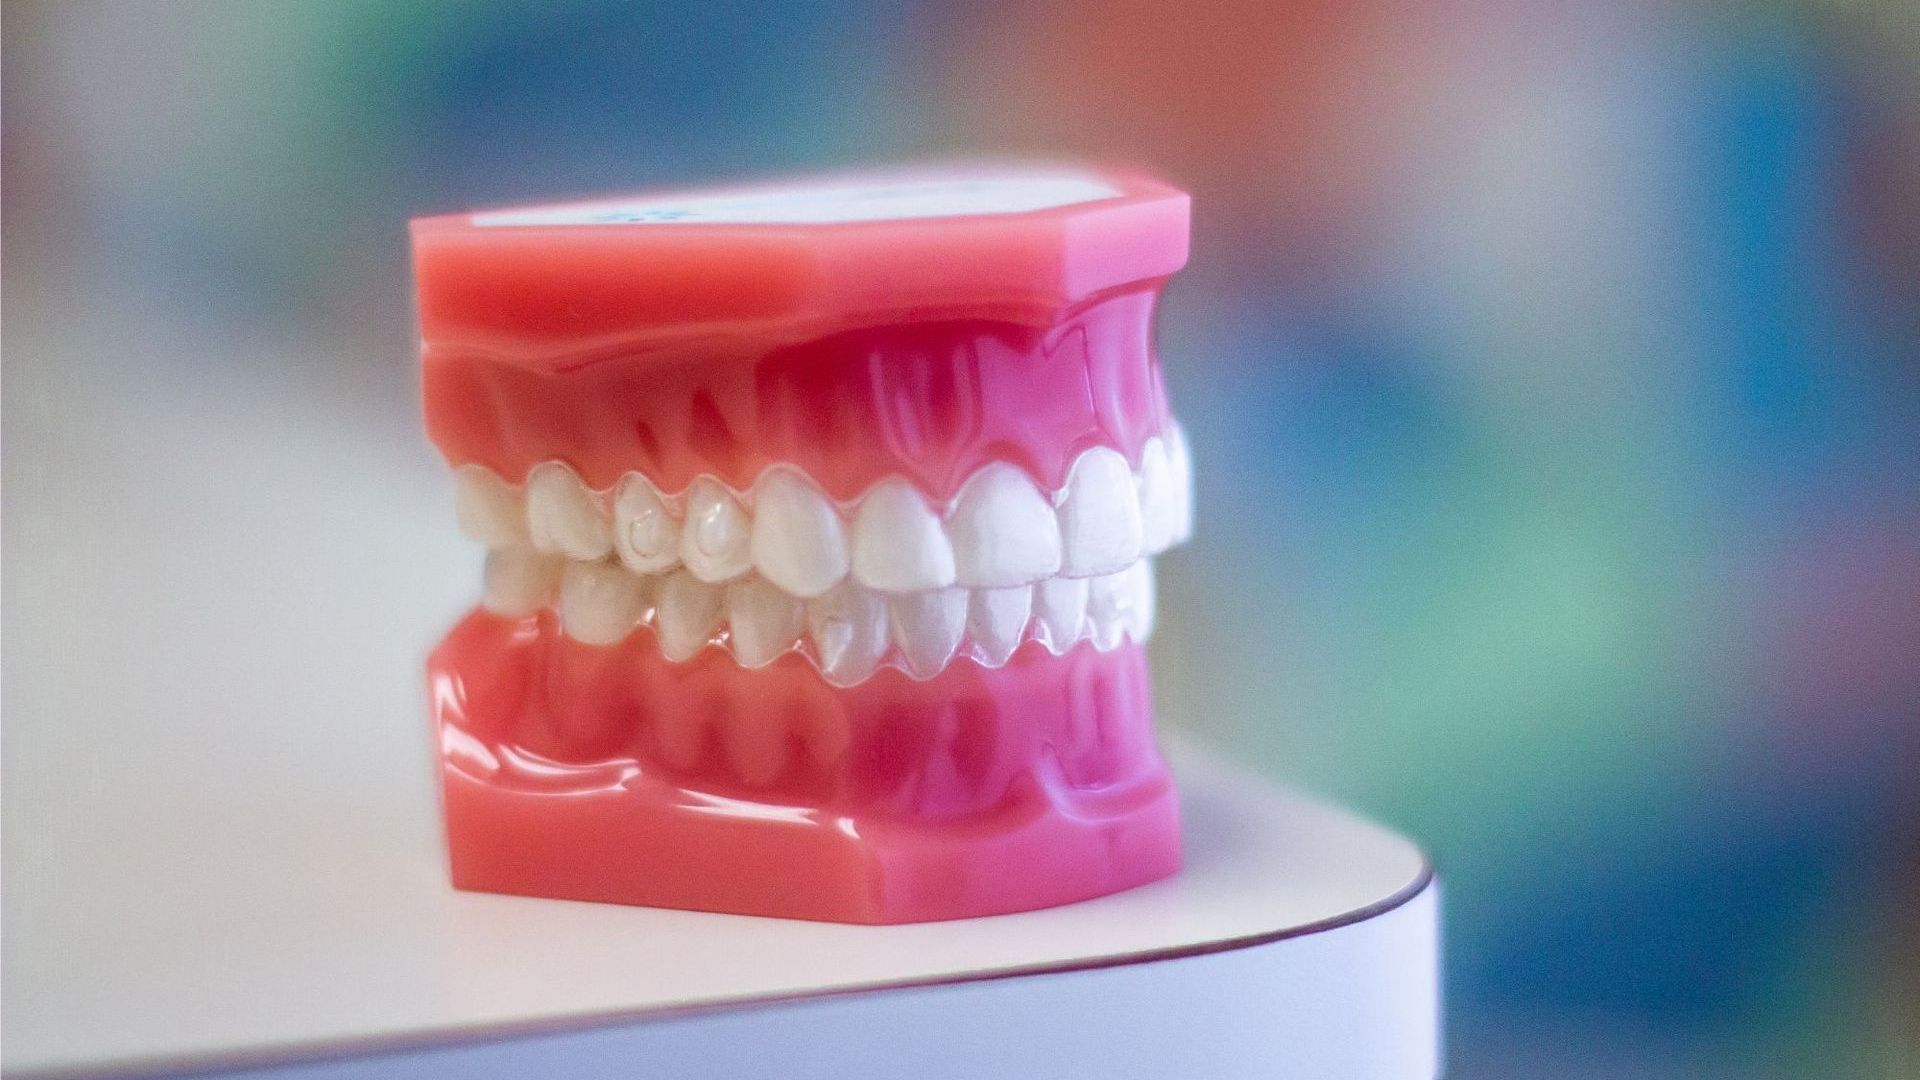 a model of a person 's teeth sits on a table